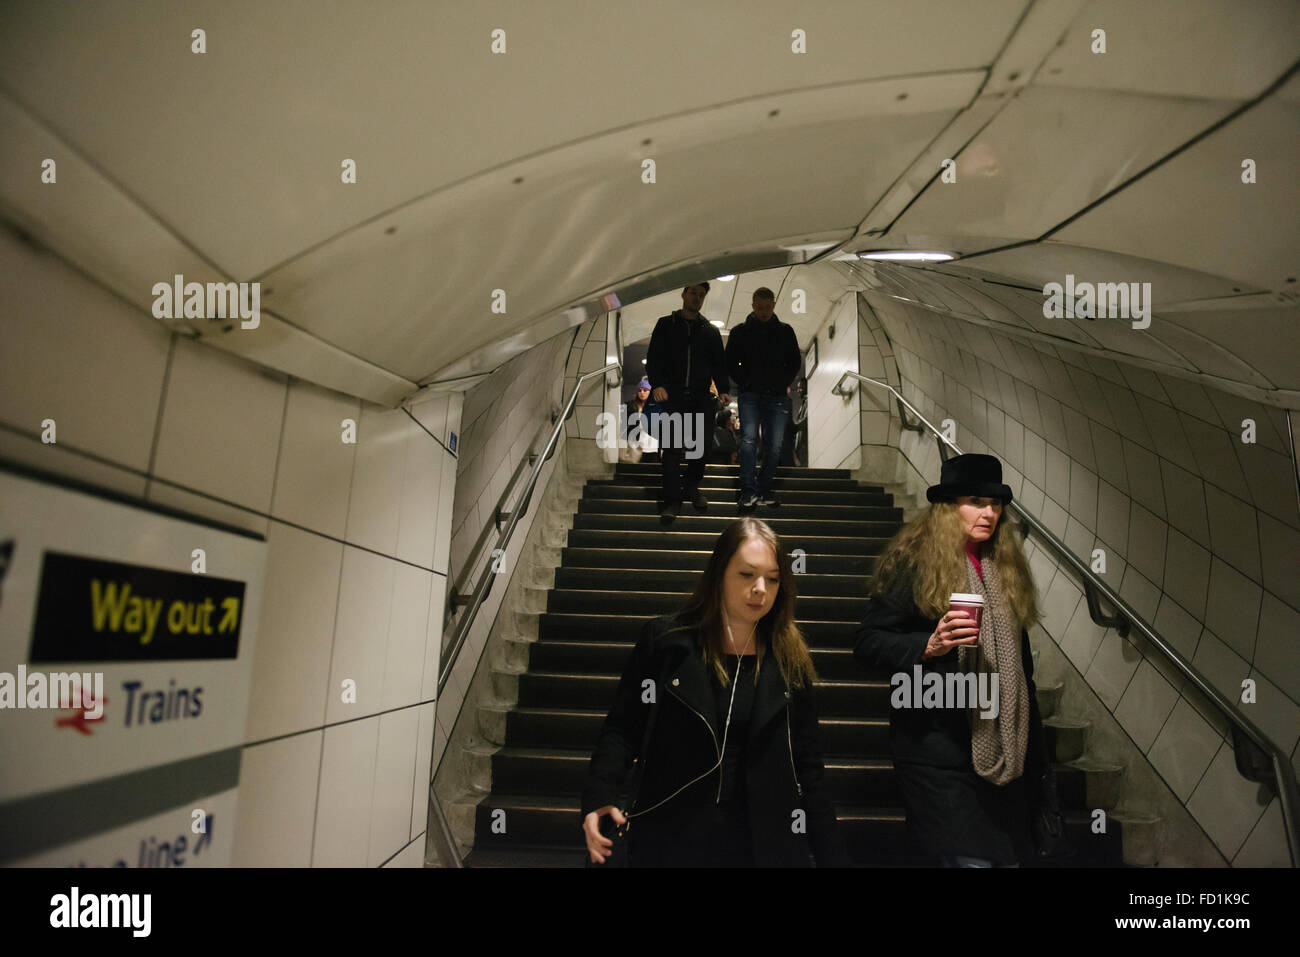 People going down the stairs at the London underground station.  Way out sign on the wall. Stock Photo